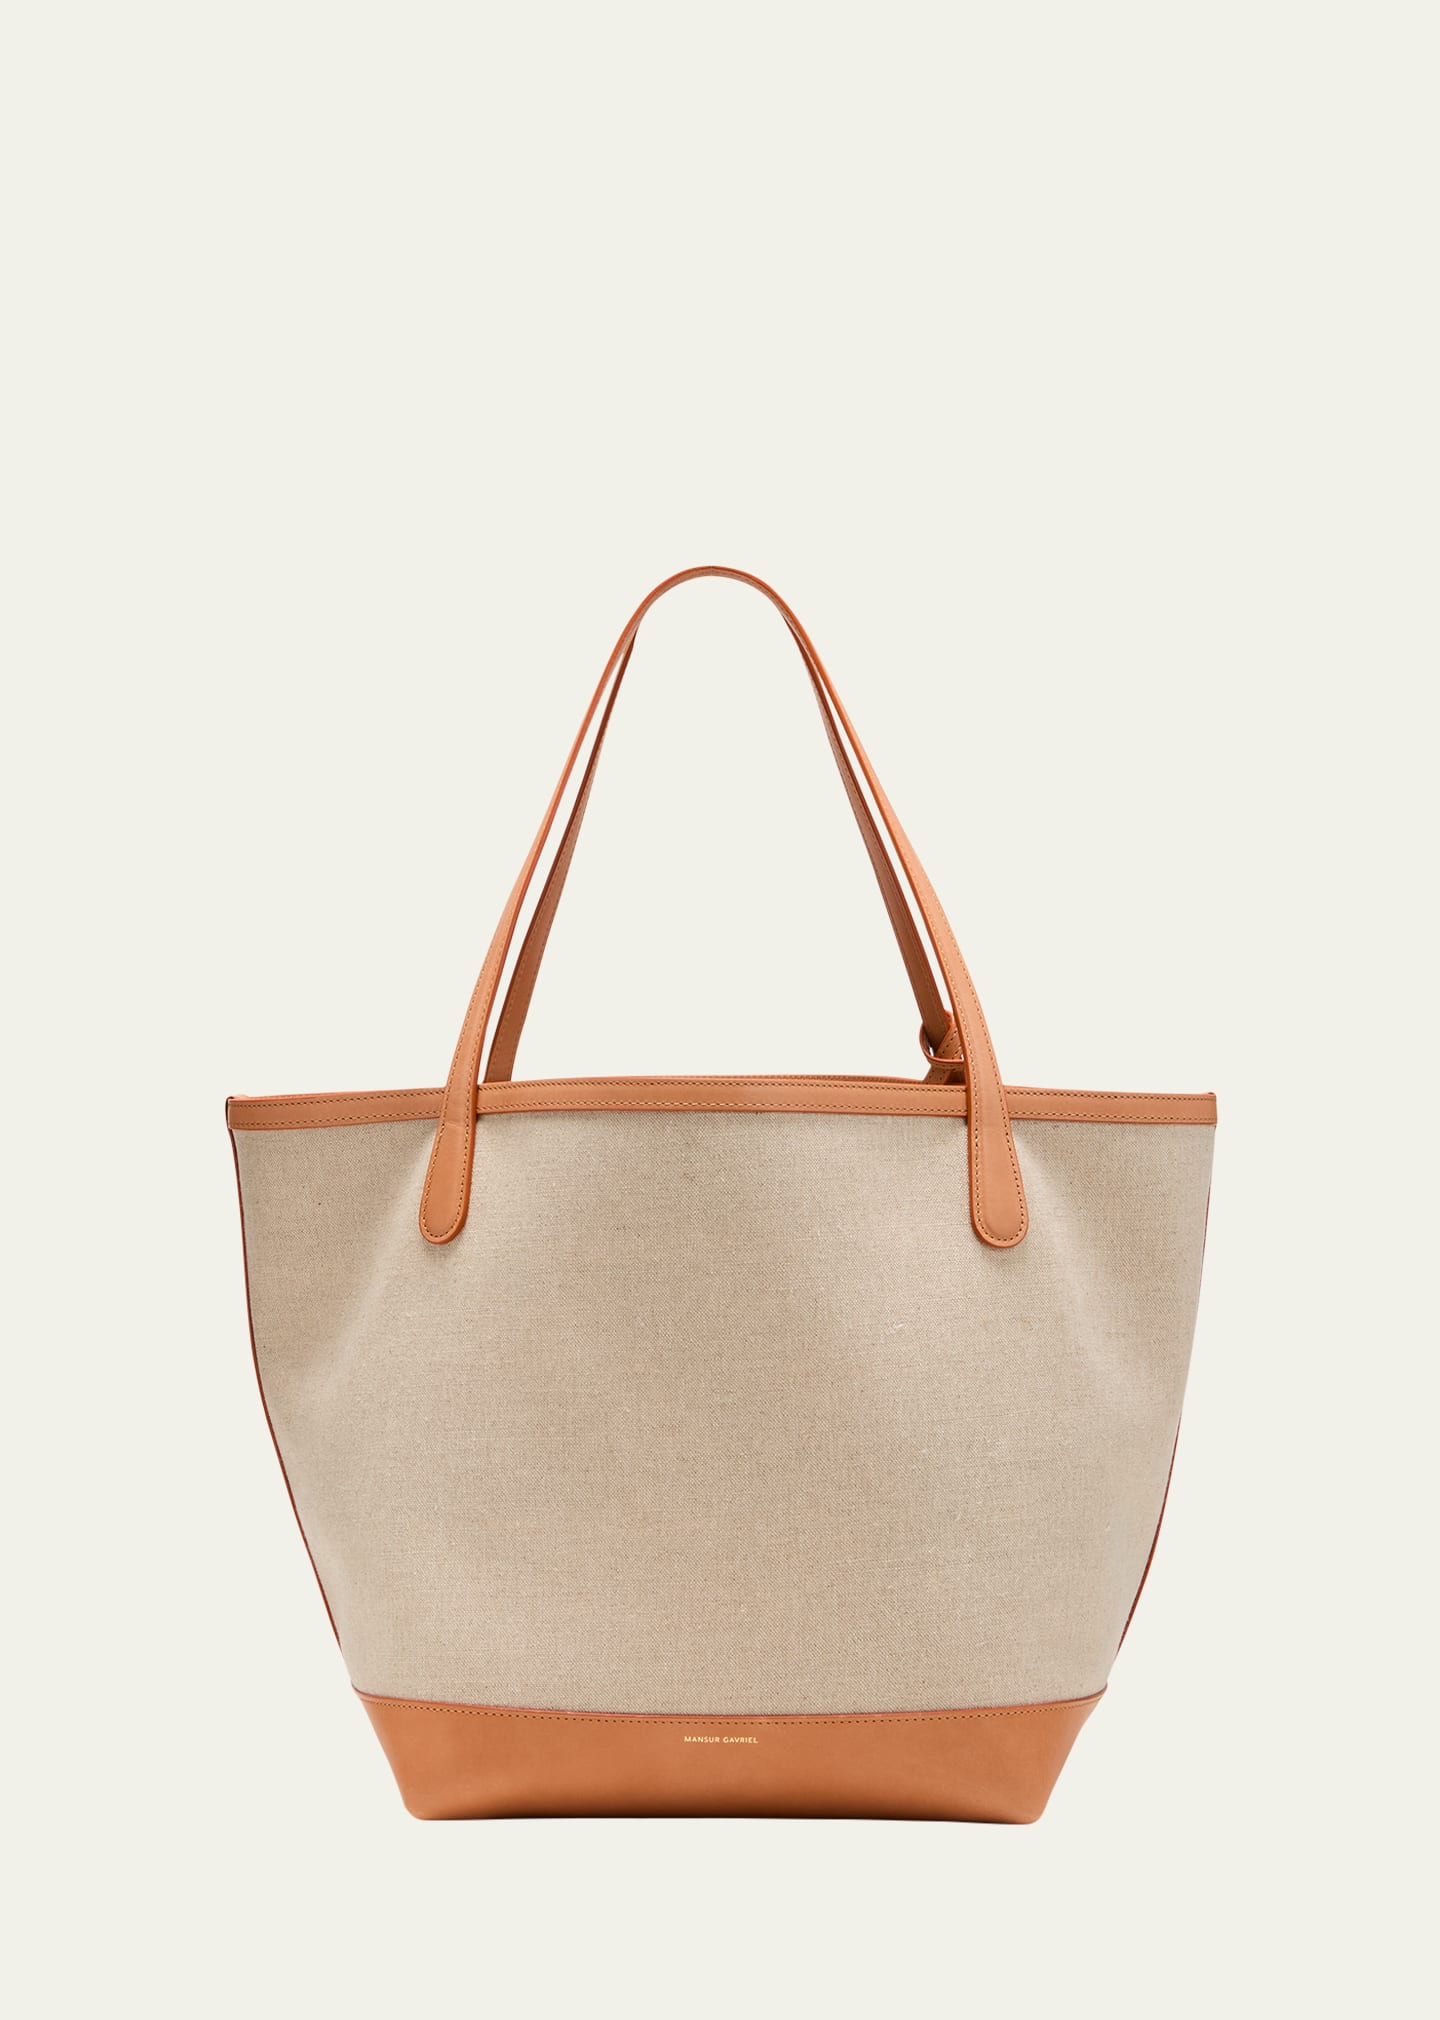 Mansur Gavriel Everyday Soft Canvas & Leather Tote In Natural